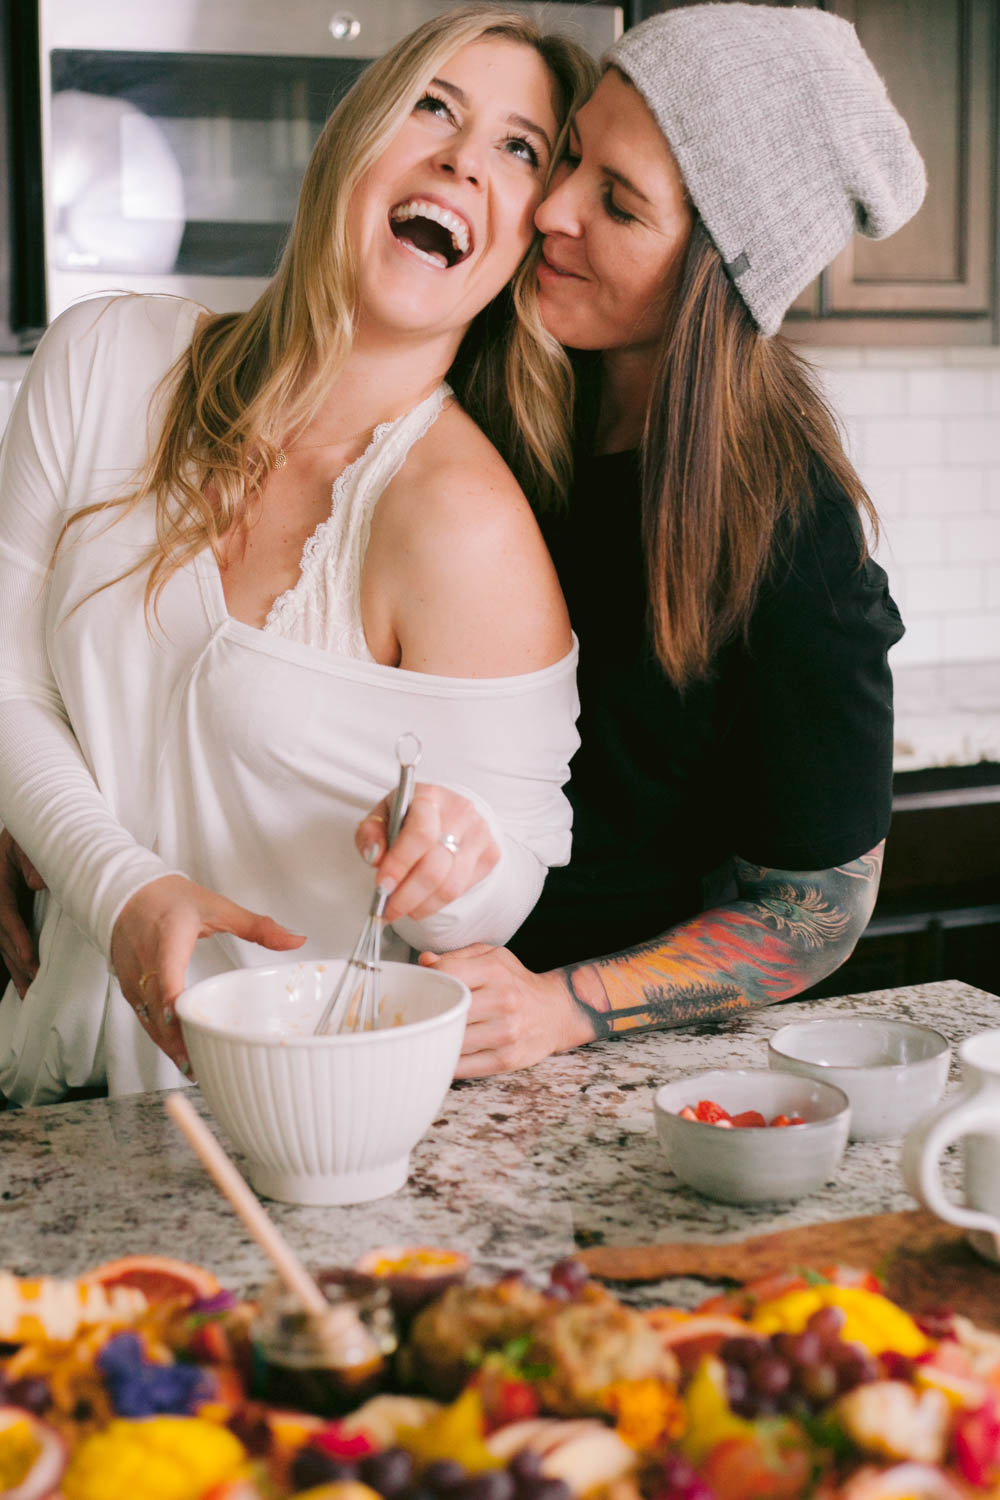 Sunday morning brunch love shoot by GunnShot Photography featured on Equally Wed, the leading LGBTQ+ wedding magazine